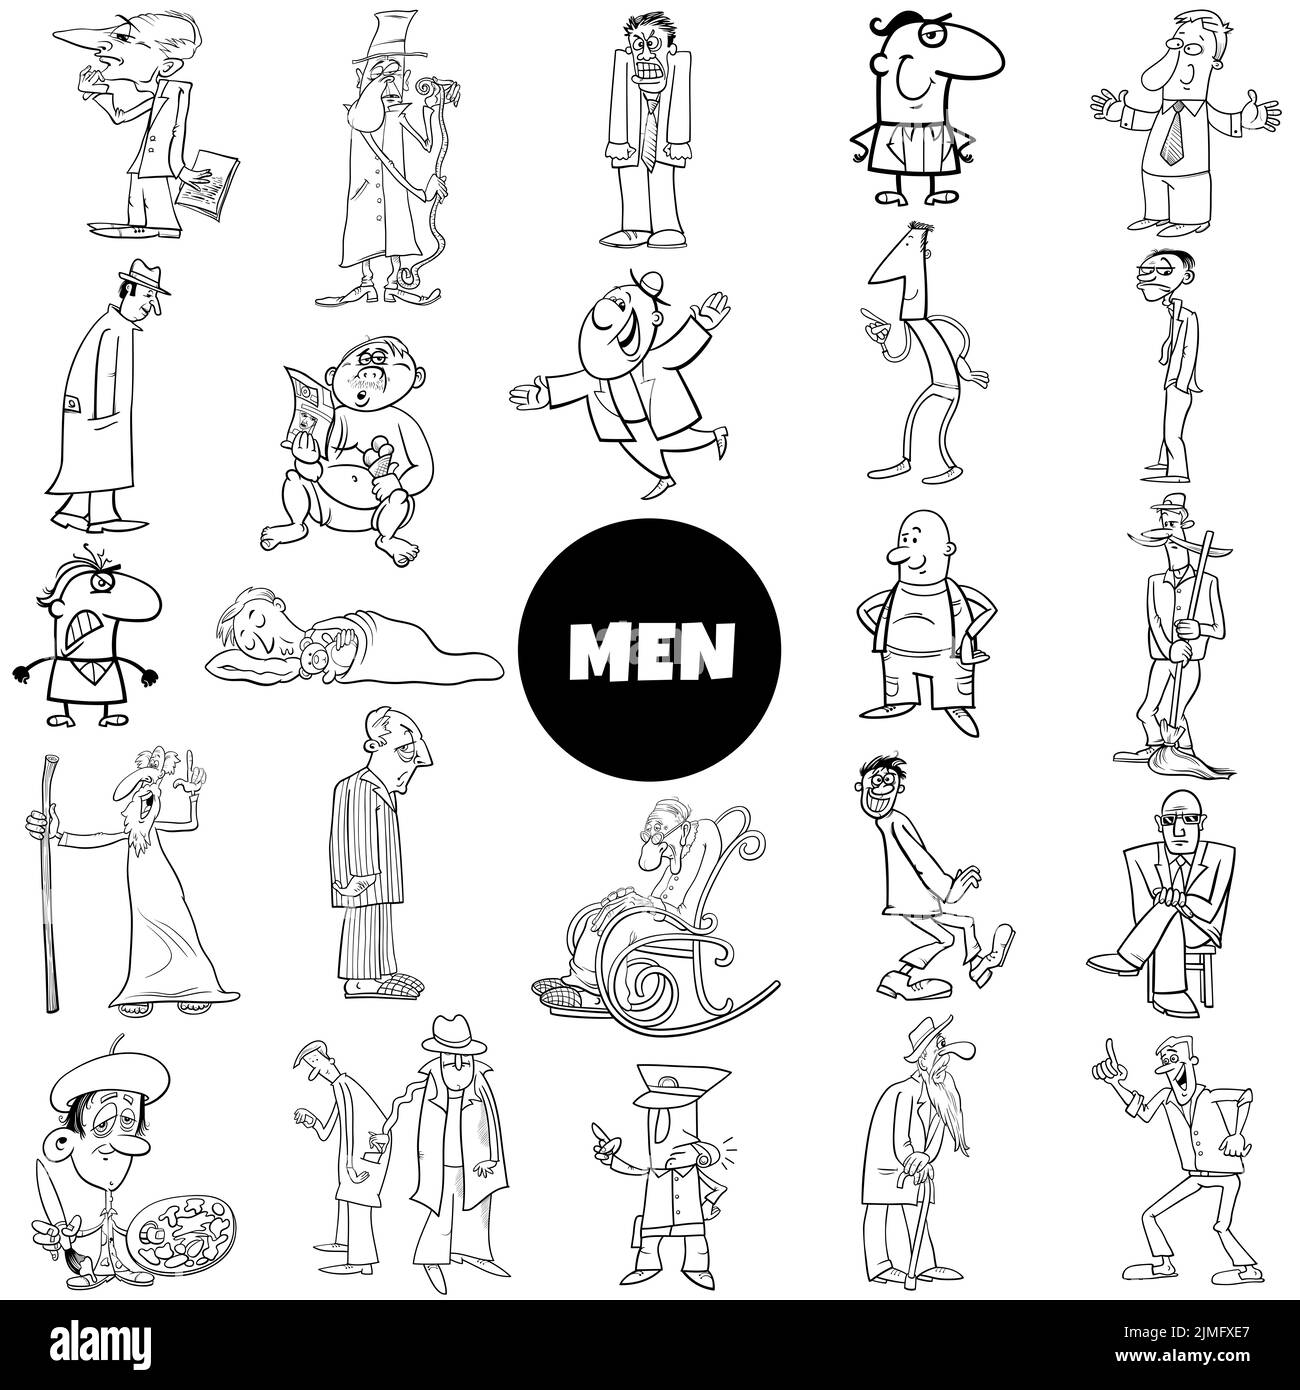 Black and white cartoon men comic characters big collection Stock Photo